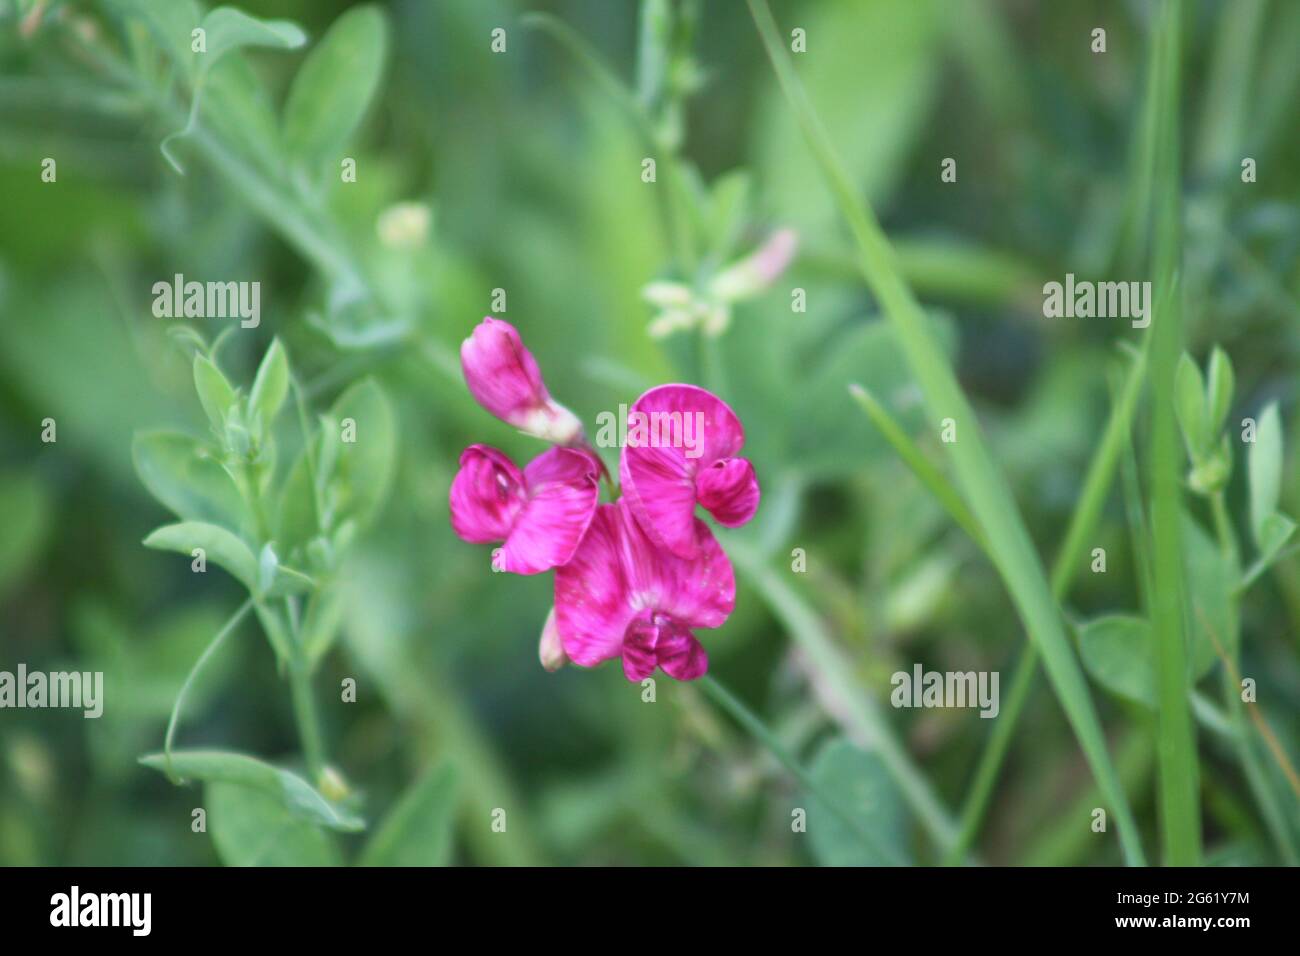 Tuberous pea in bloom close-up view with green plants in background Stock Photo